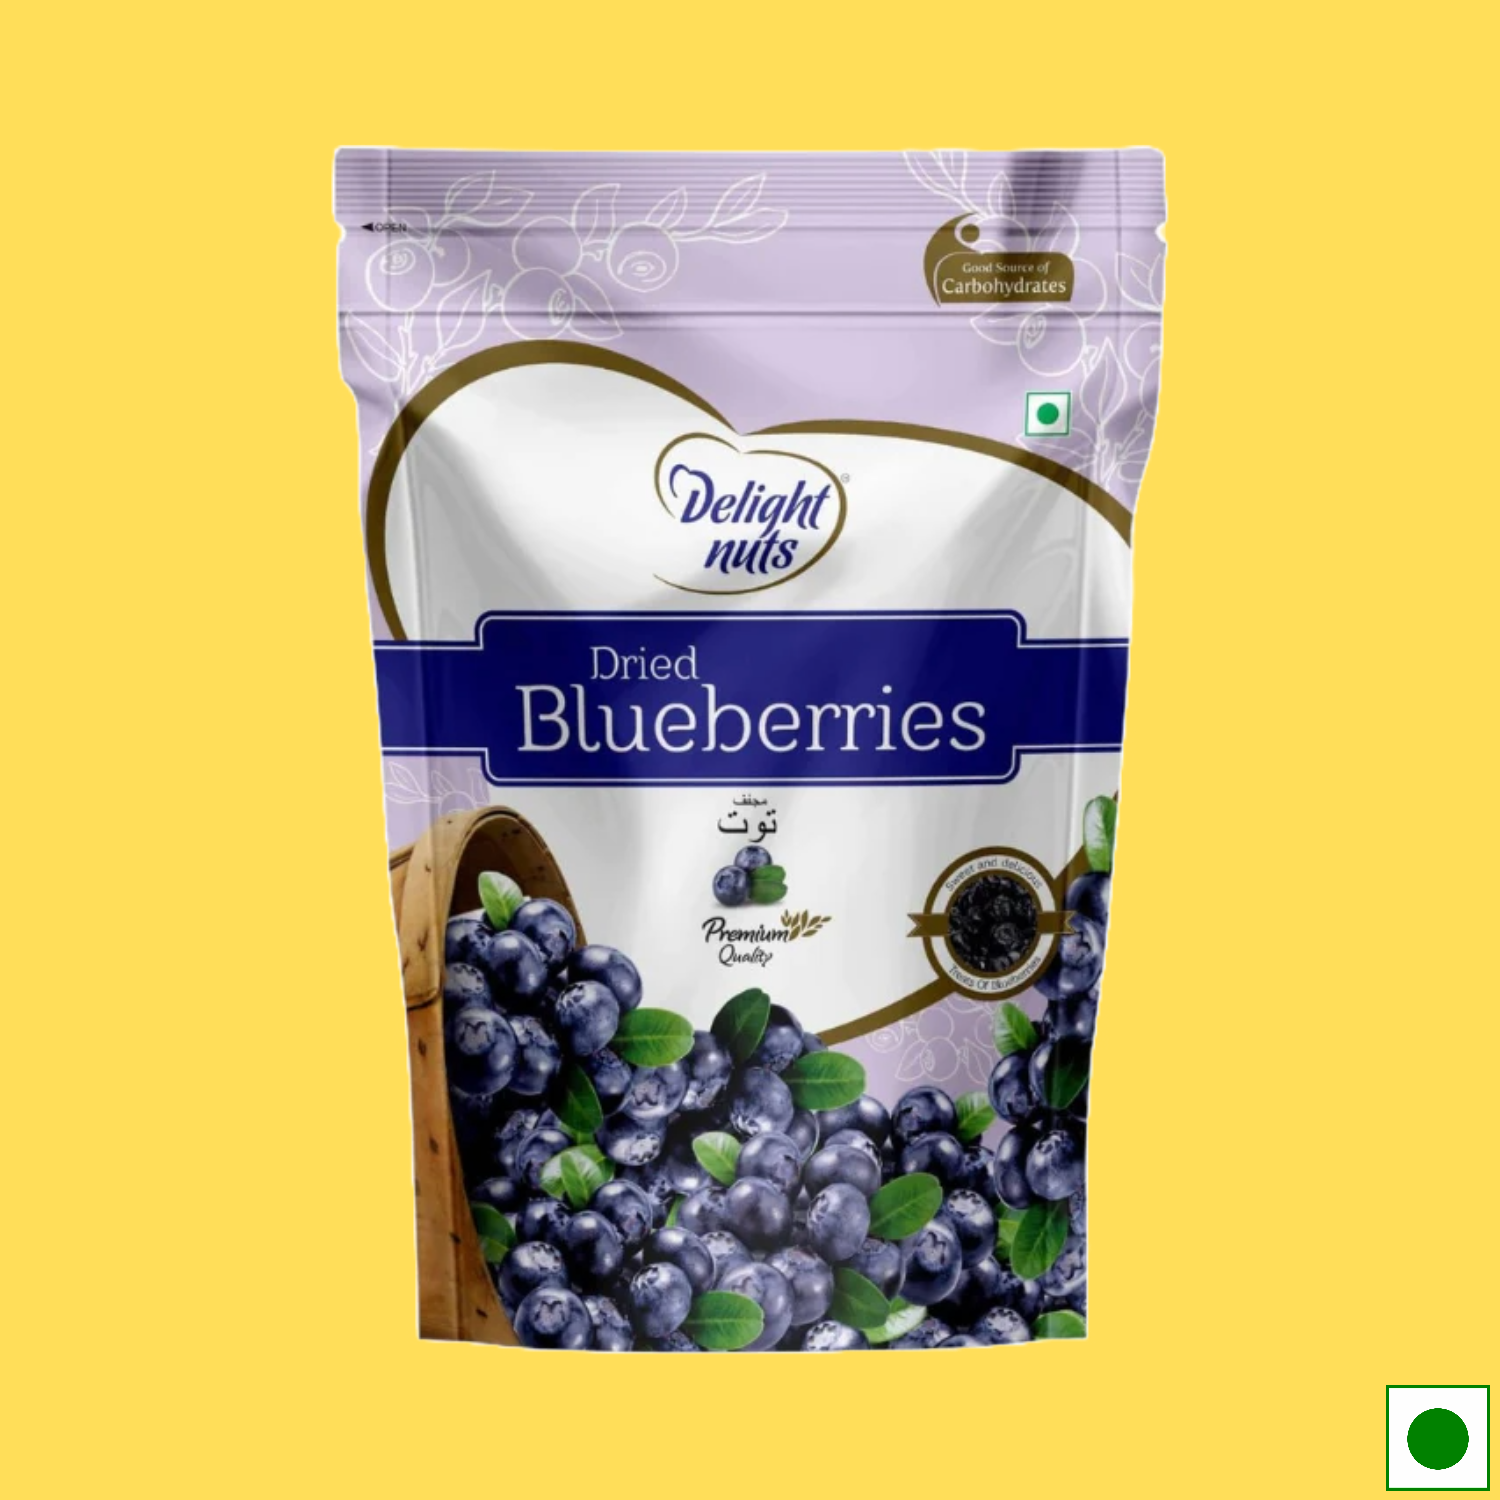 Delight Nuts Dried Blueberries, 200g